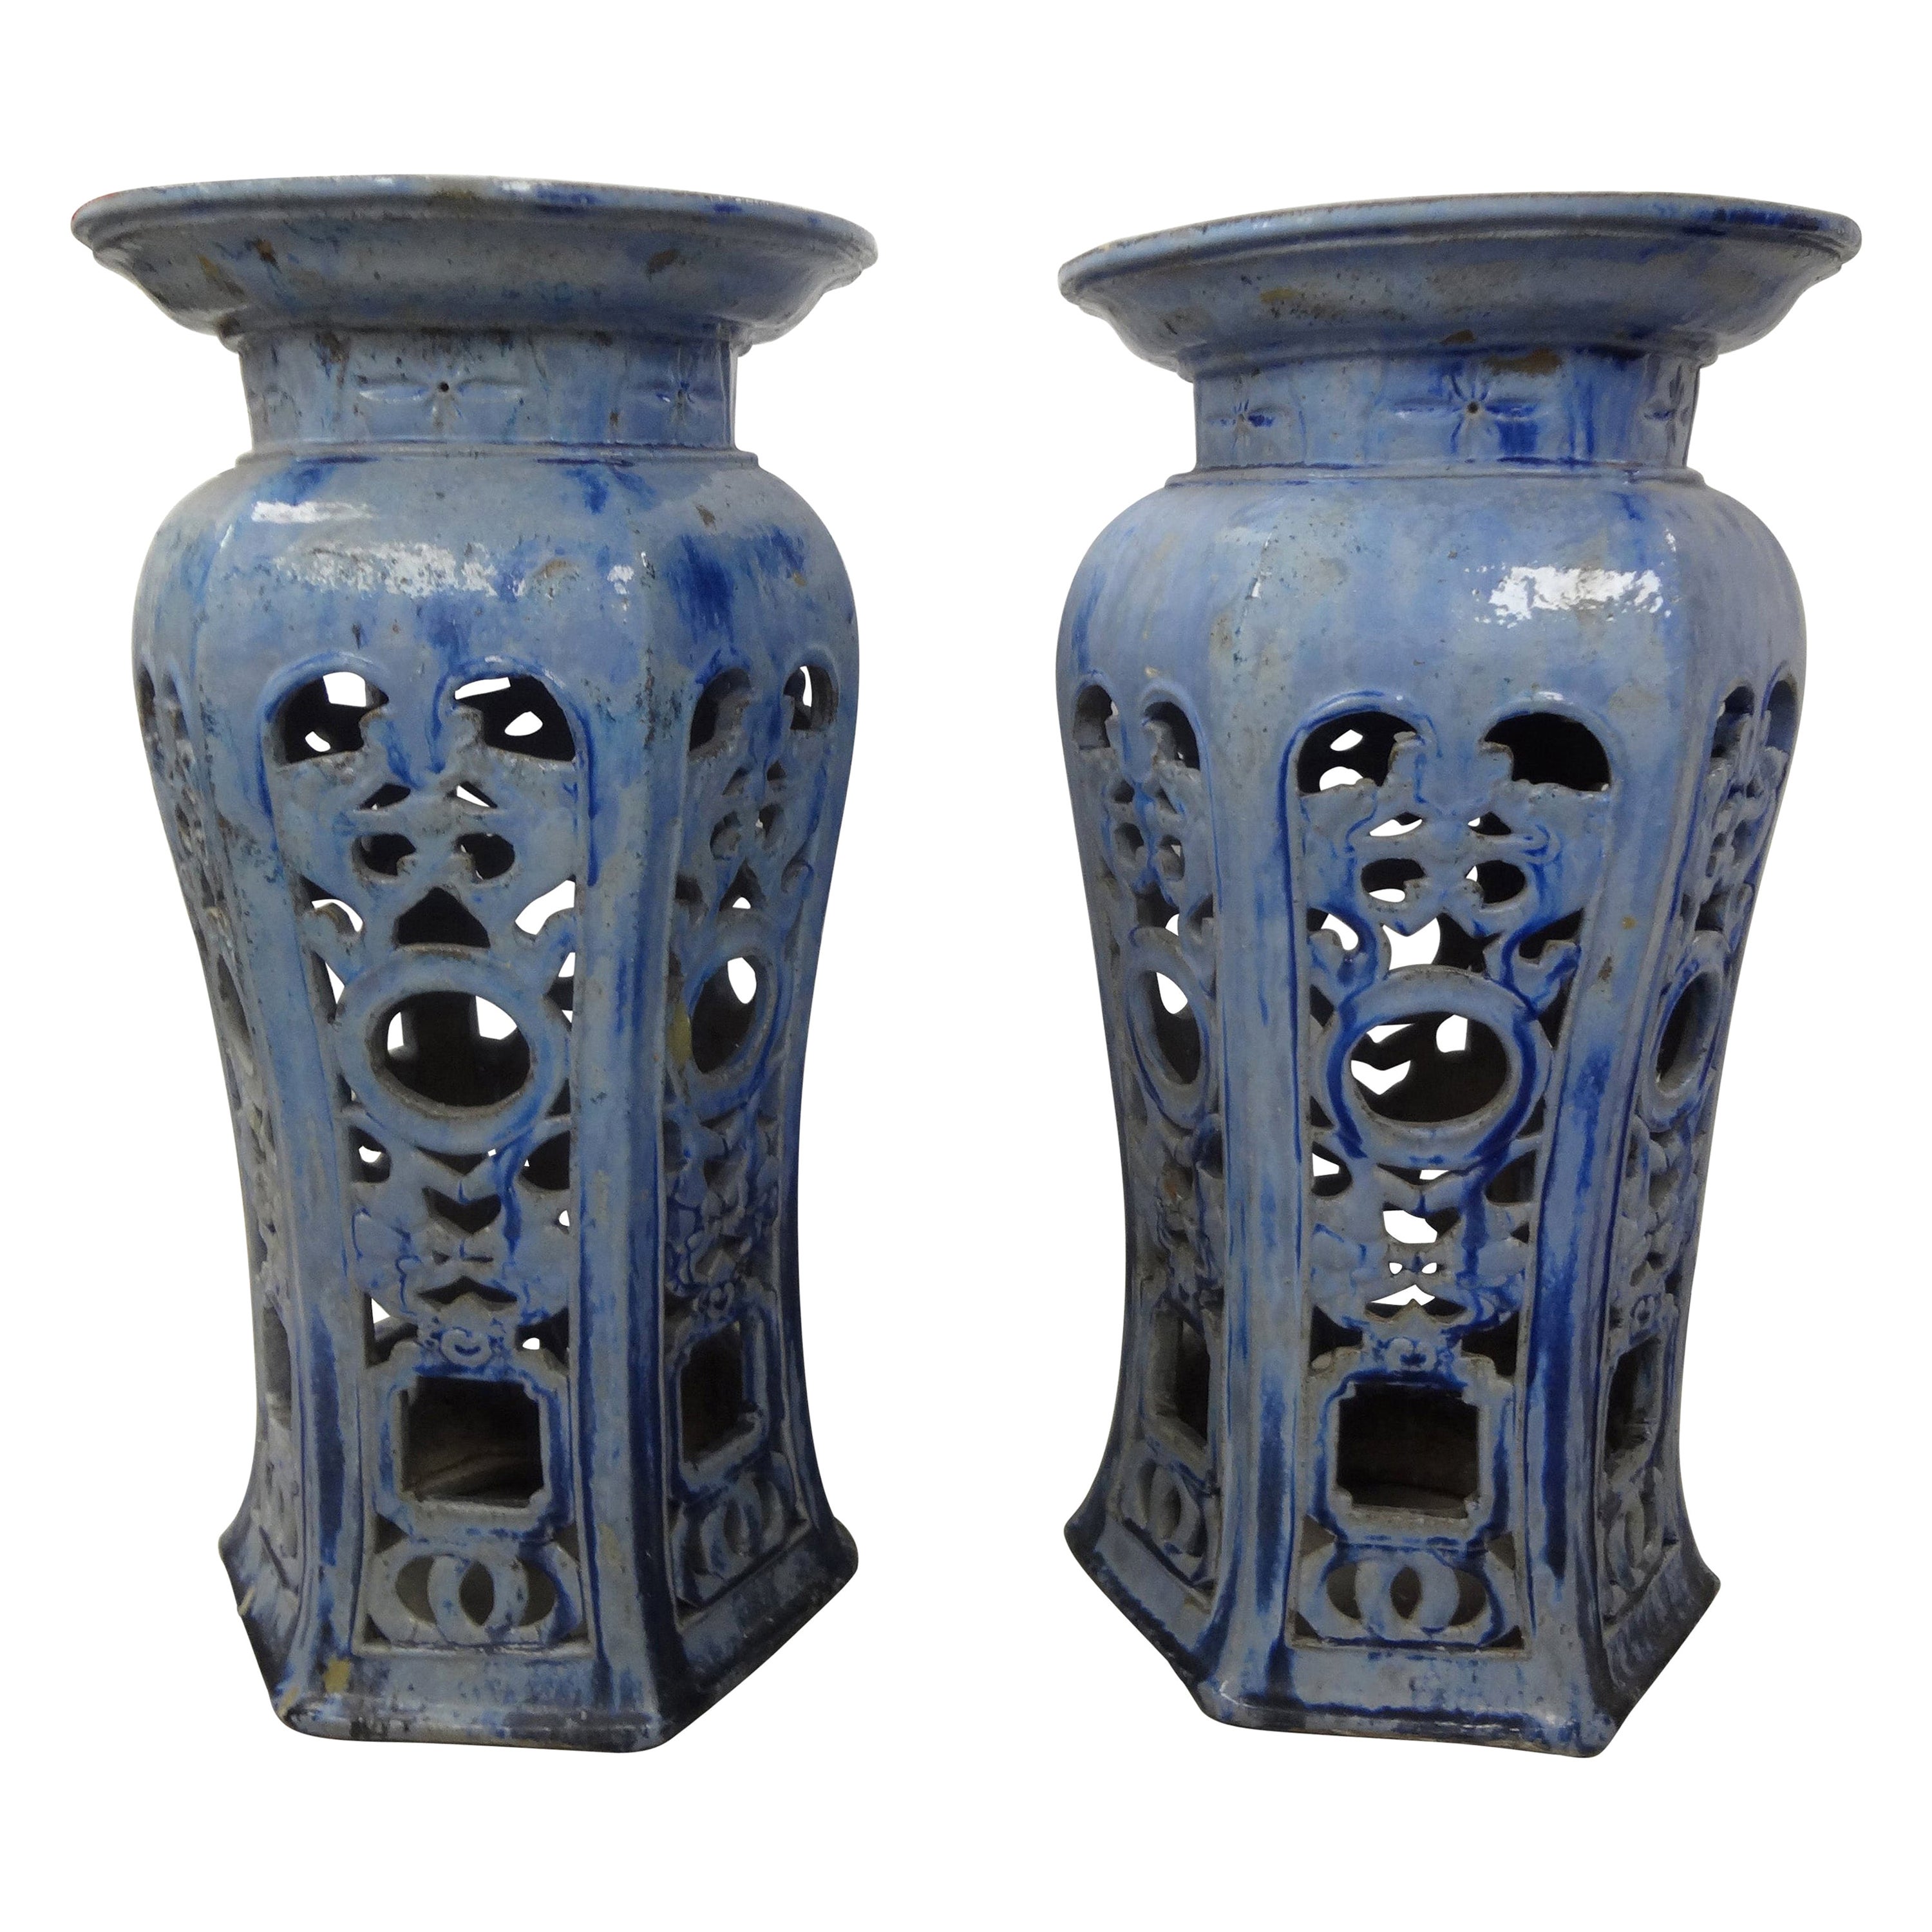 Pair of Early 20th Century Chinese Glazed Terra Cotta Pedestals or Stands For Sale